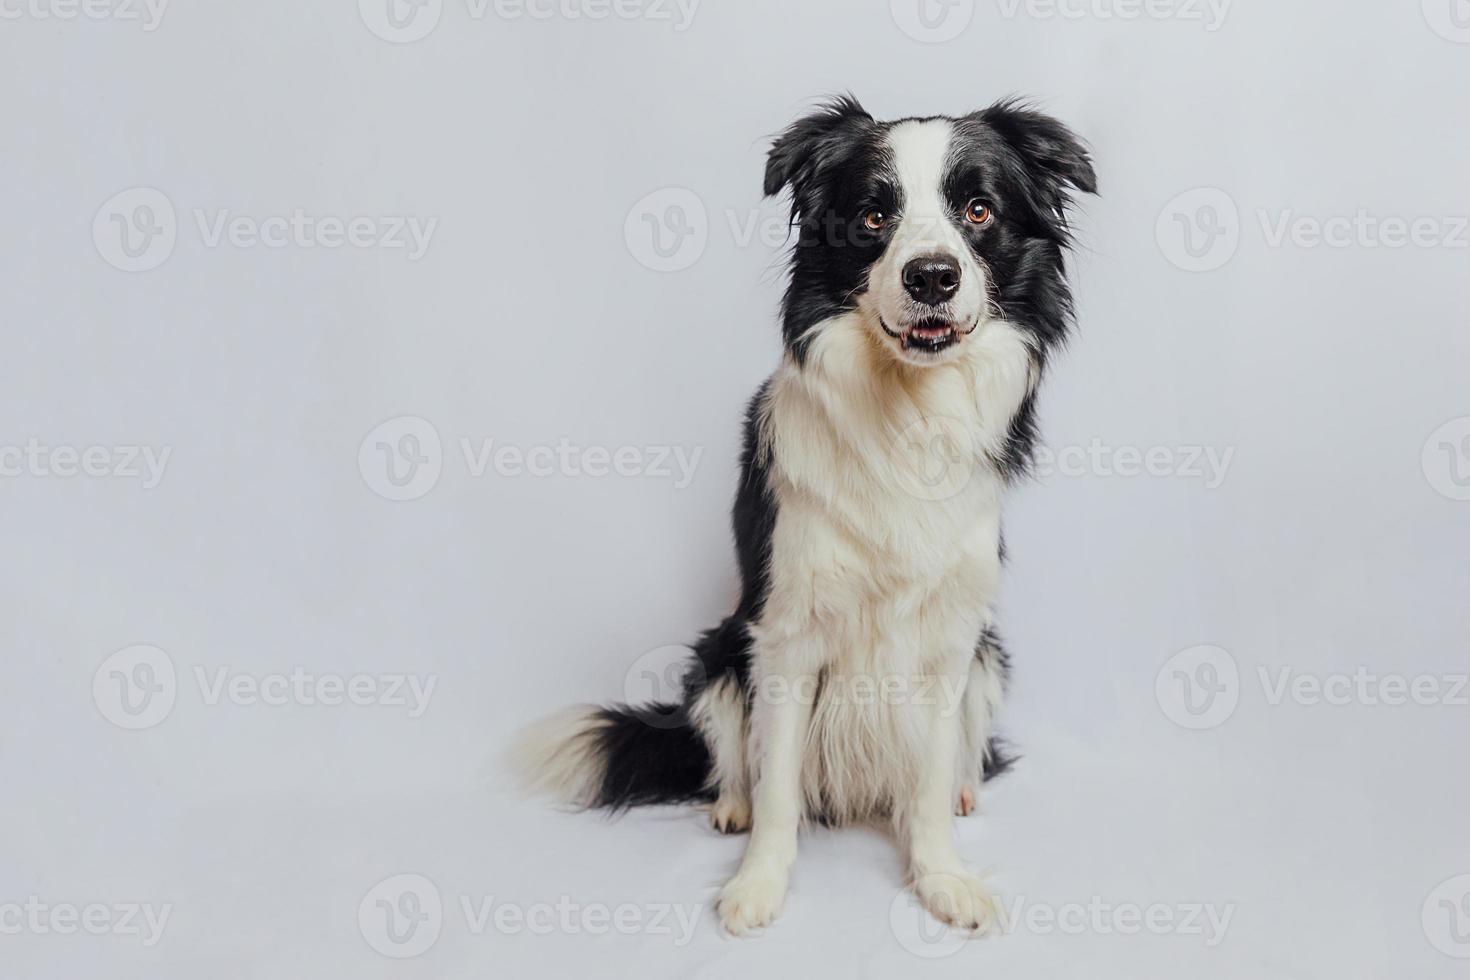 Cute puppy dog border collie with funny face sitting isolated on white background. Cute pet dog. Pet animal life concept. photo